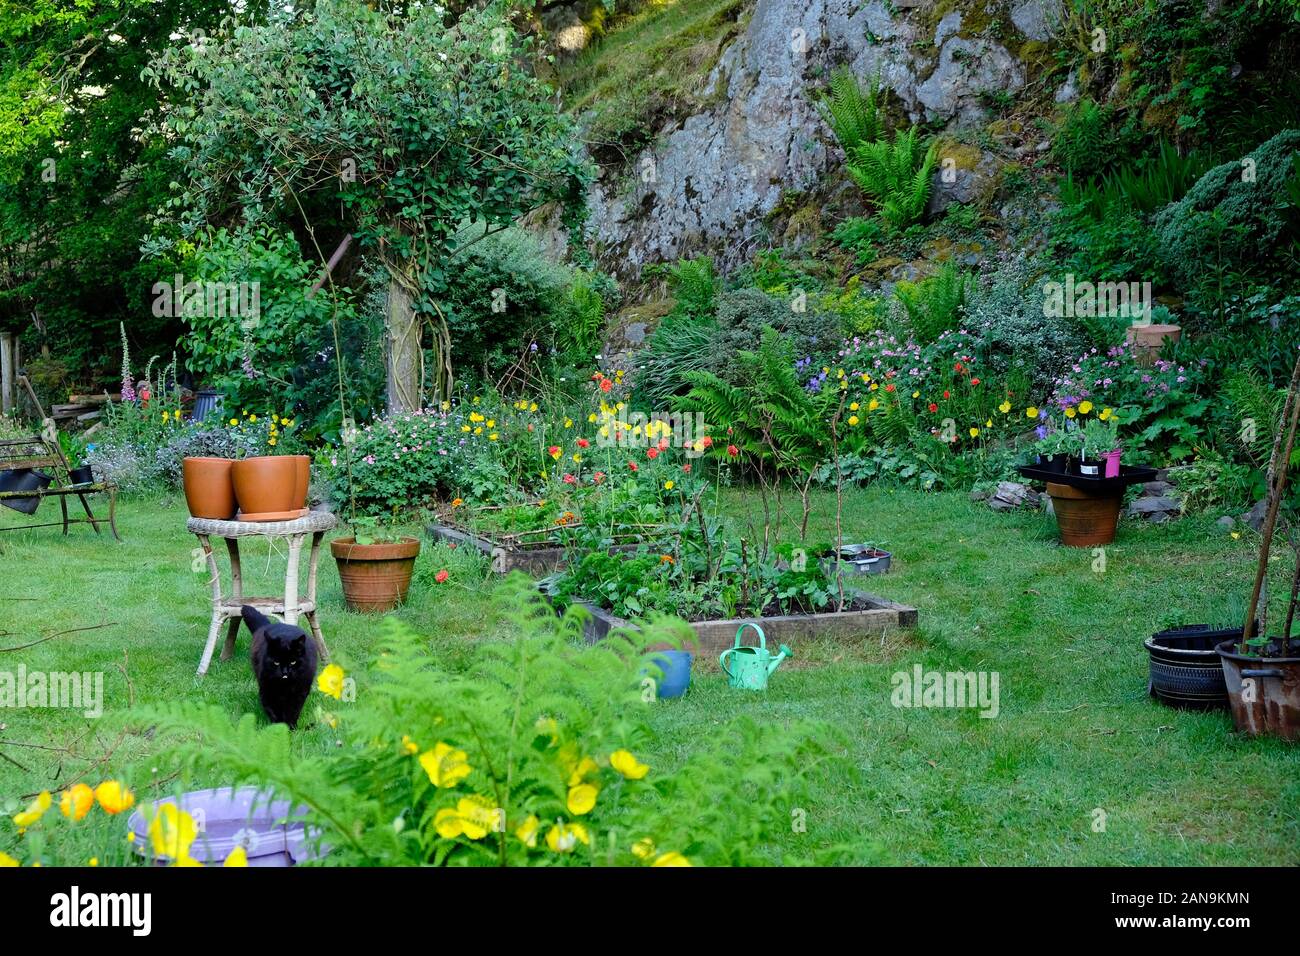 Black cat, raised beds & terra cotta pots in country garden growing Welsh poppies flowers and vegetables in May Carmarthenshire Wales UK  KATHY DEWITT Stock Photo